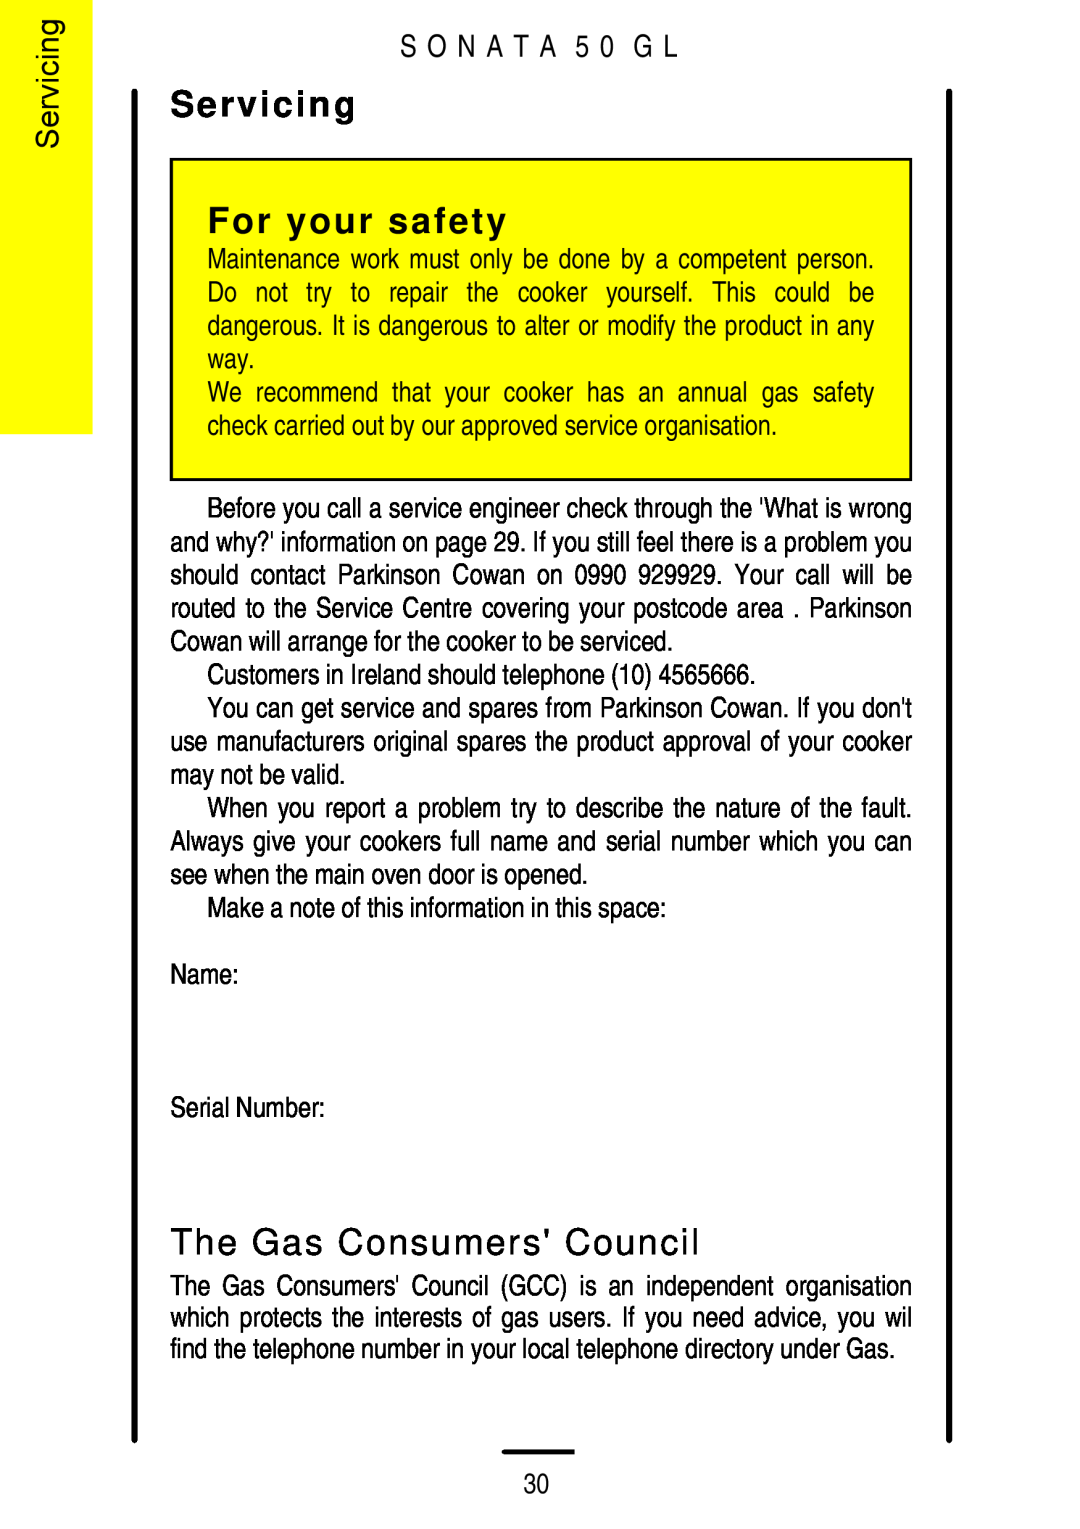 Electrolux installation instructions Servicing For your safety, The Gas Consumers Council, S O N A T A 5 0 G L 